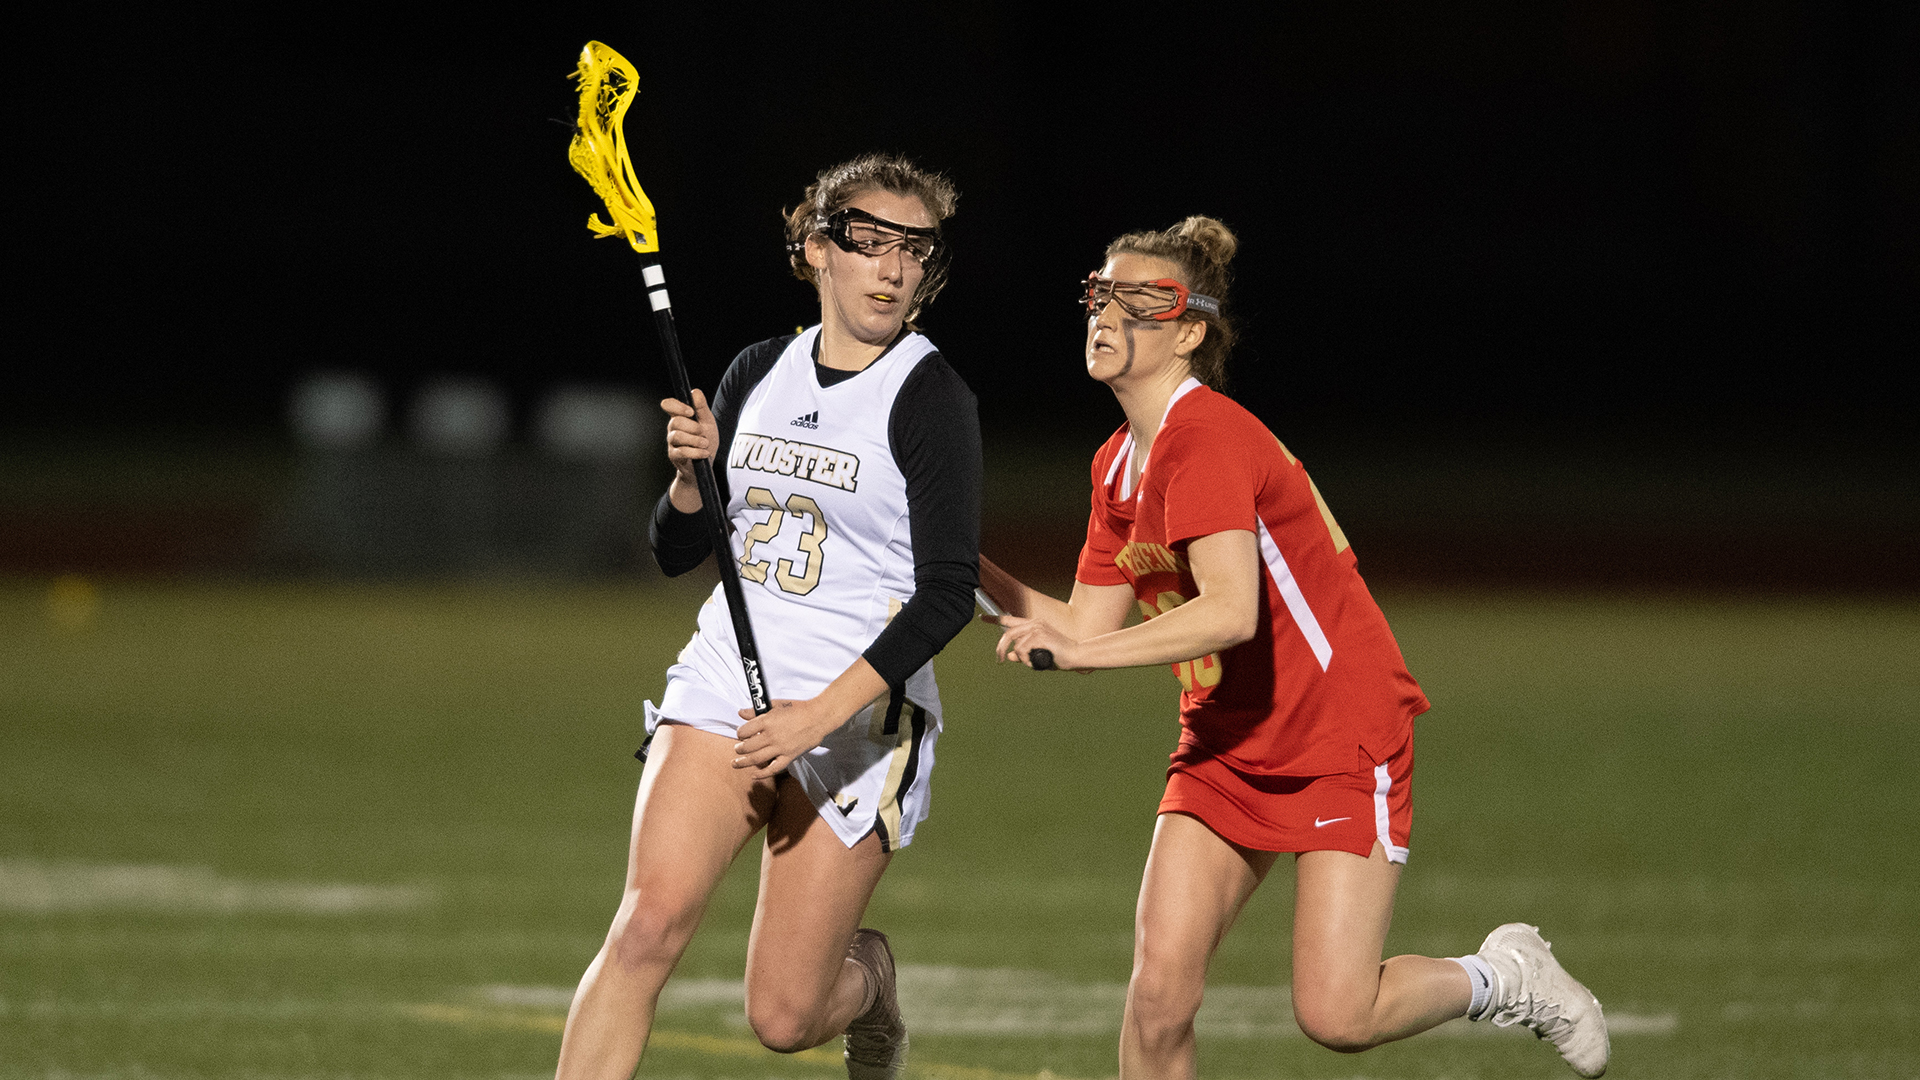 Hannah Shaw, College of Wooster lacrosse